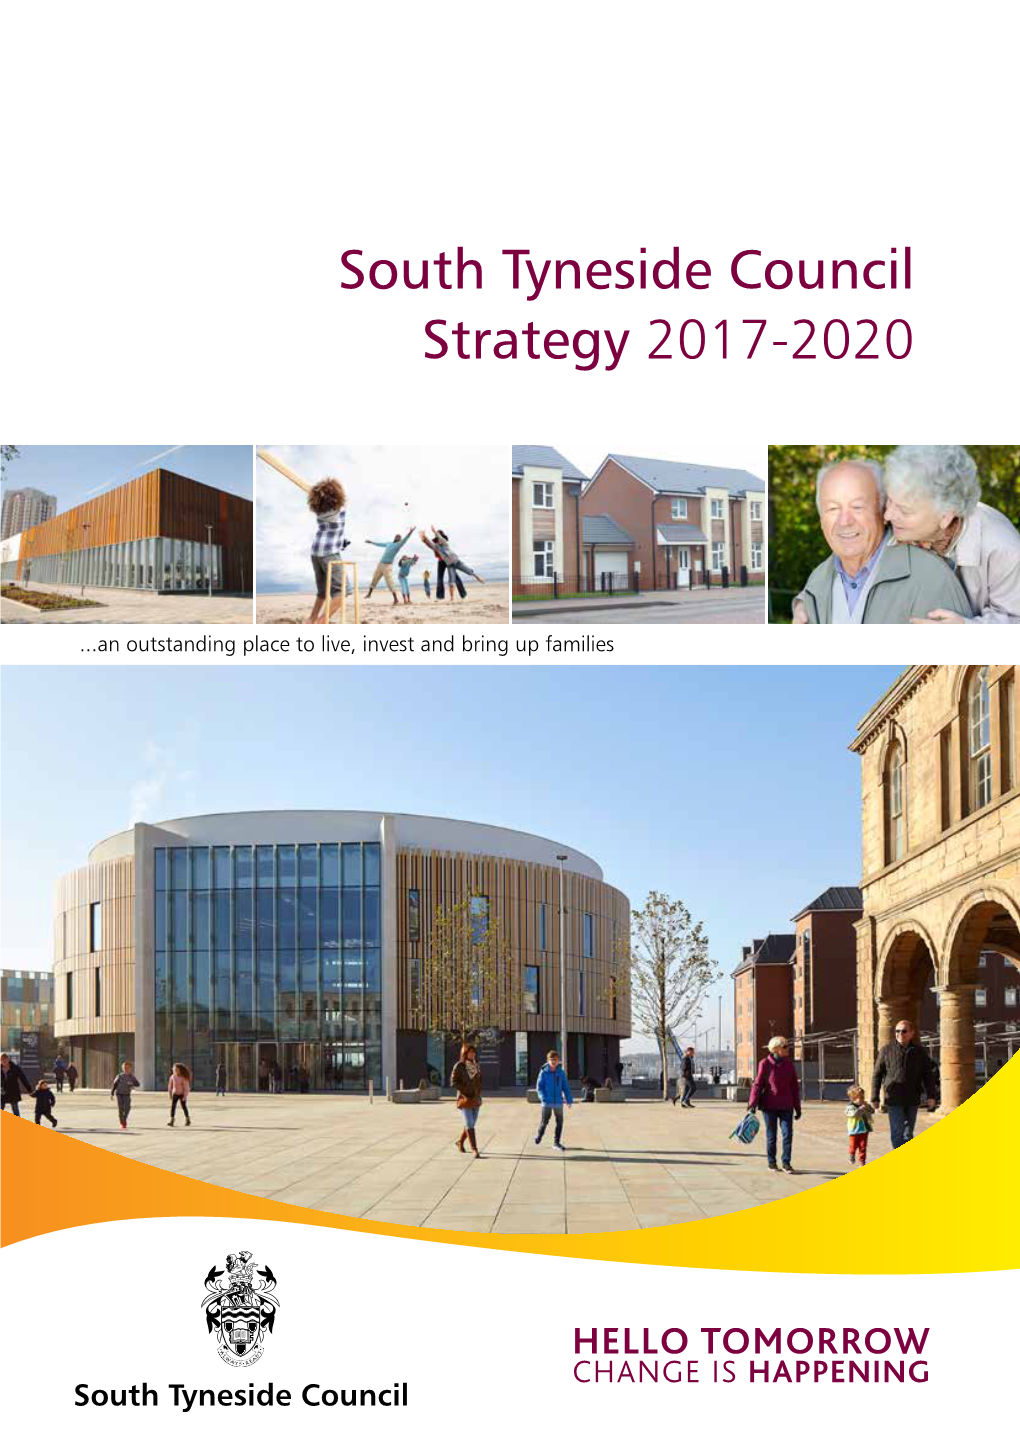 South Tyneside Council Strategy 2017-2020